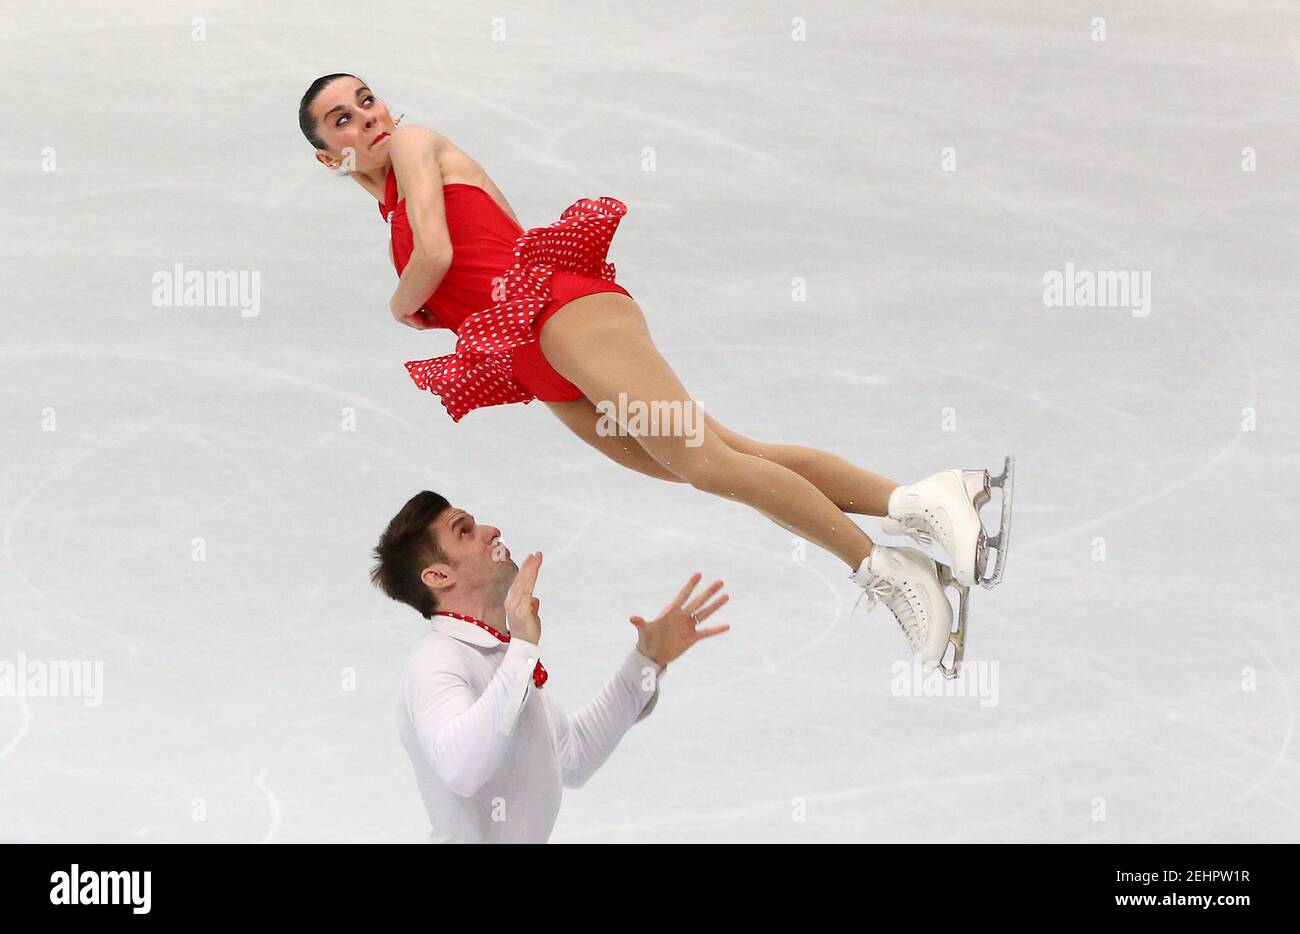 Figure Skating - World Figure Skating Championships - The Mediolanum Forum, Milan, Italy - March 21, 2018   Italy's Valentina Marchei and Ondrej Hotarek during the Pairs Short Programme   REUTERS/Alessandro Bianchi Stock Photo